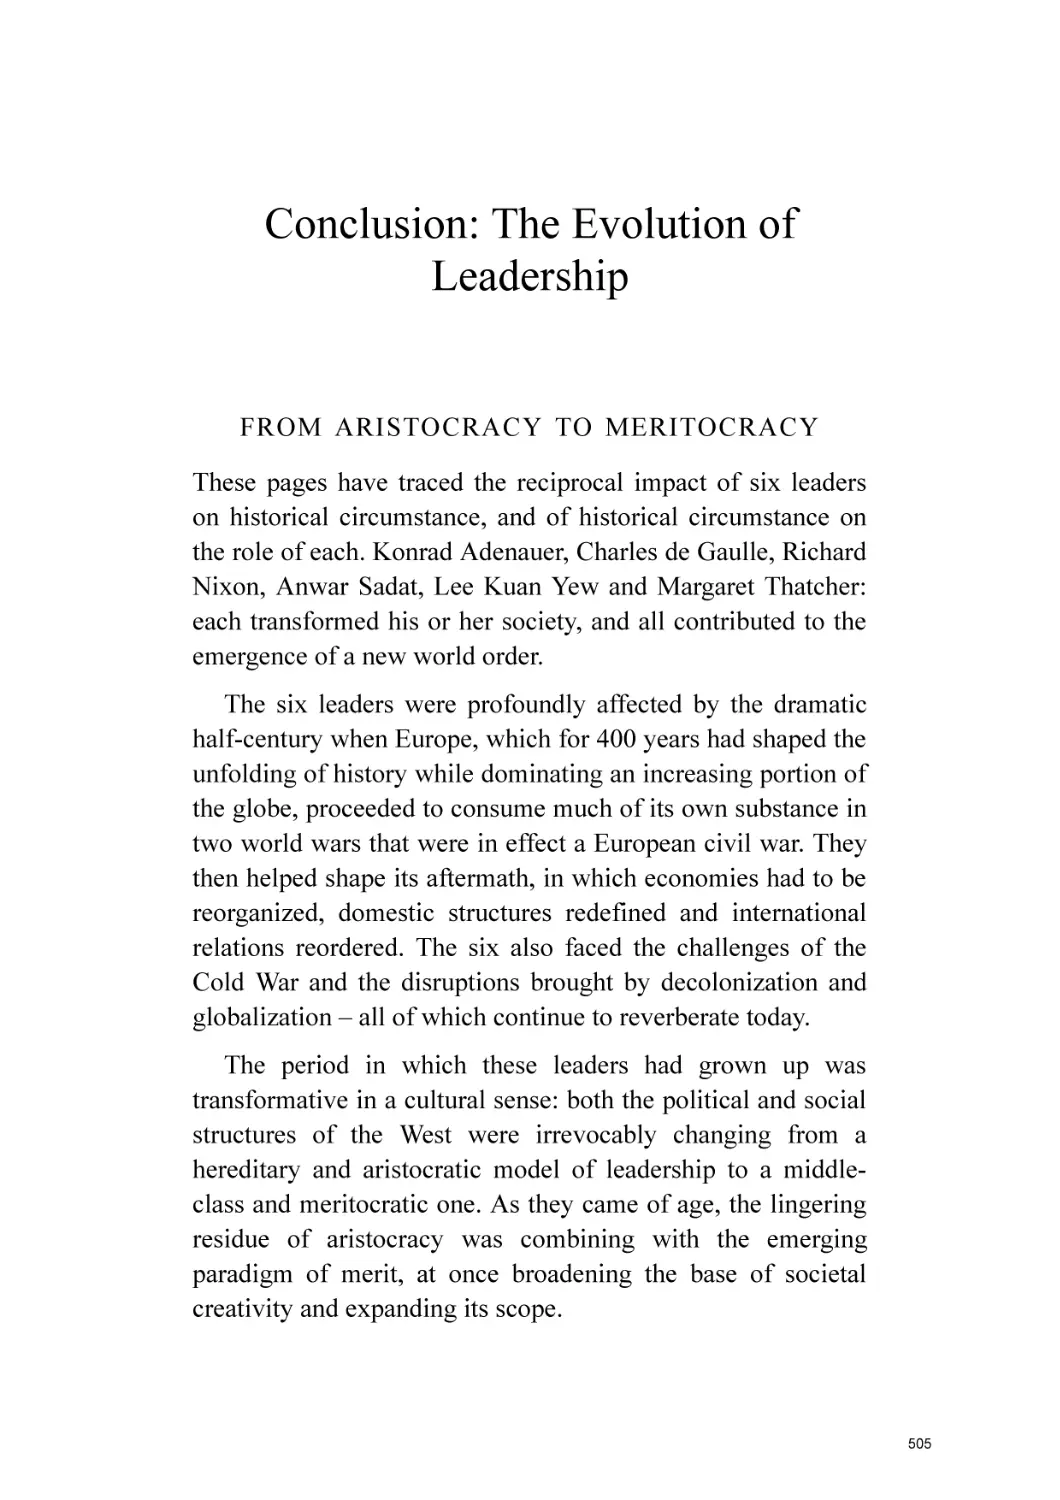 Conclusion
From Aristocracy to Meritocracy